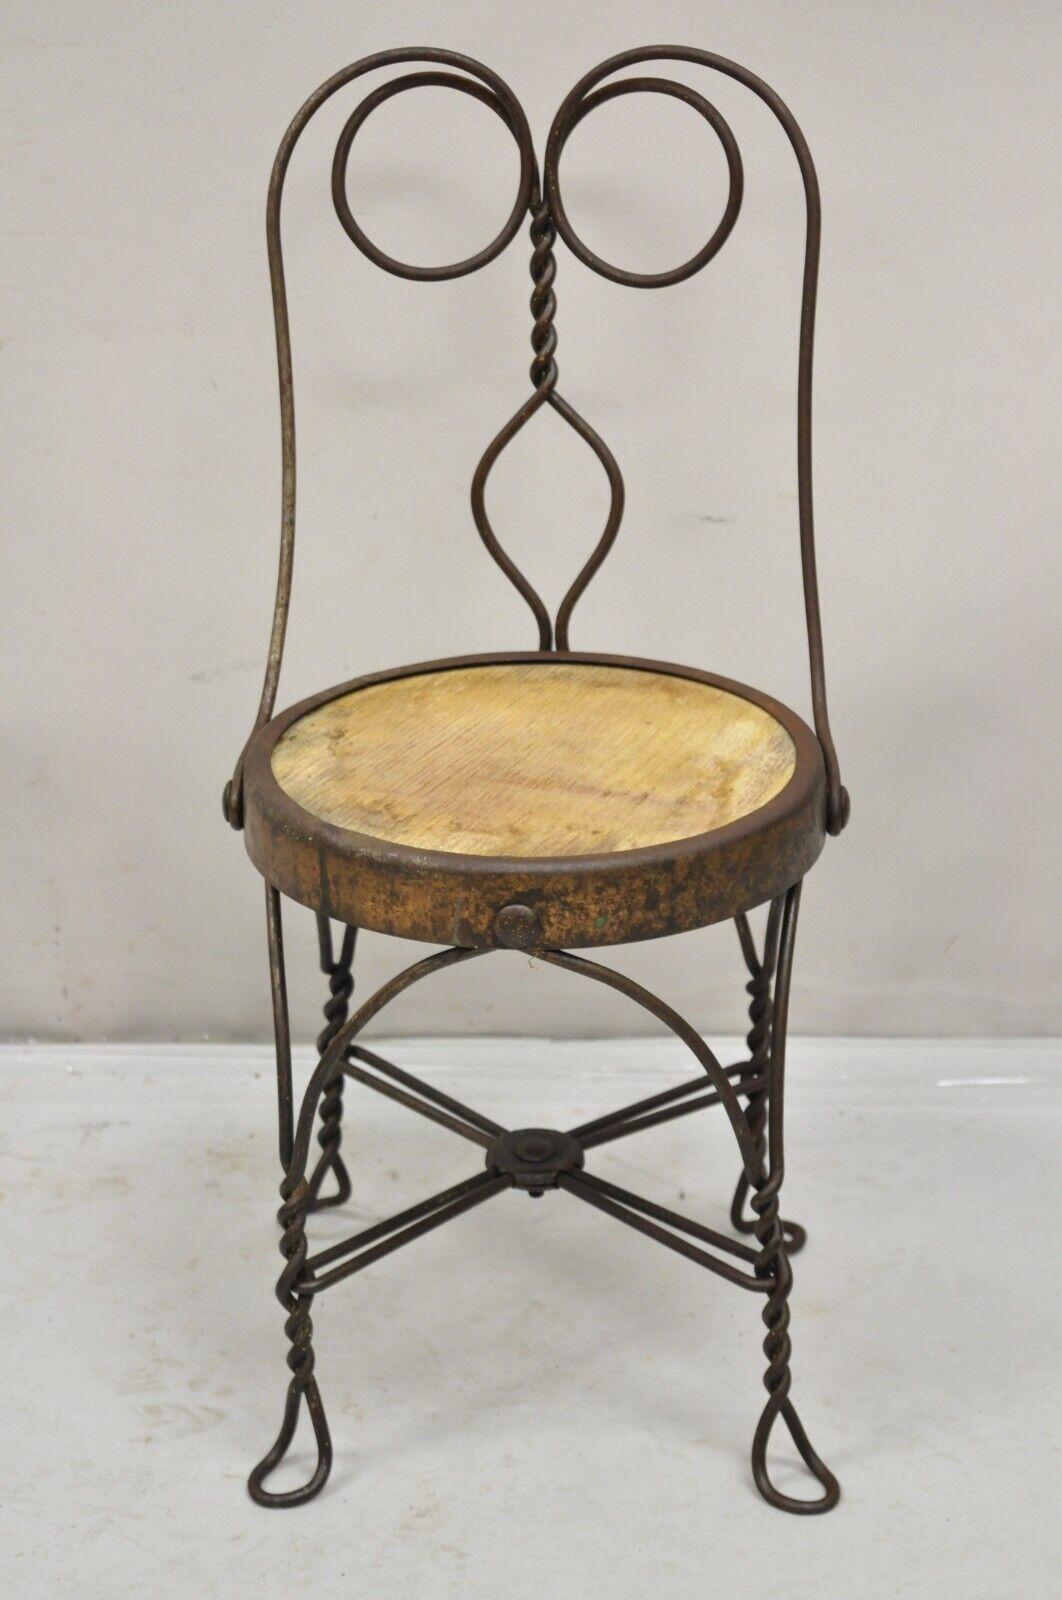 Antique Victorian Twisted Wire Wooden Seat Small Child's Sweetheart Back Ice Cream Parlor Chair. Circa 19th Century.
Measurements: 22.5